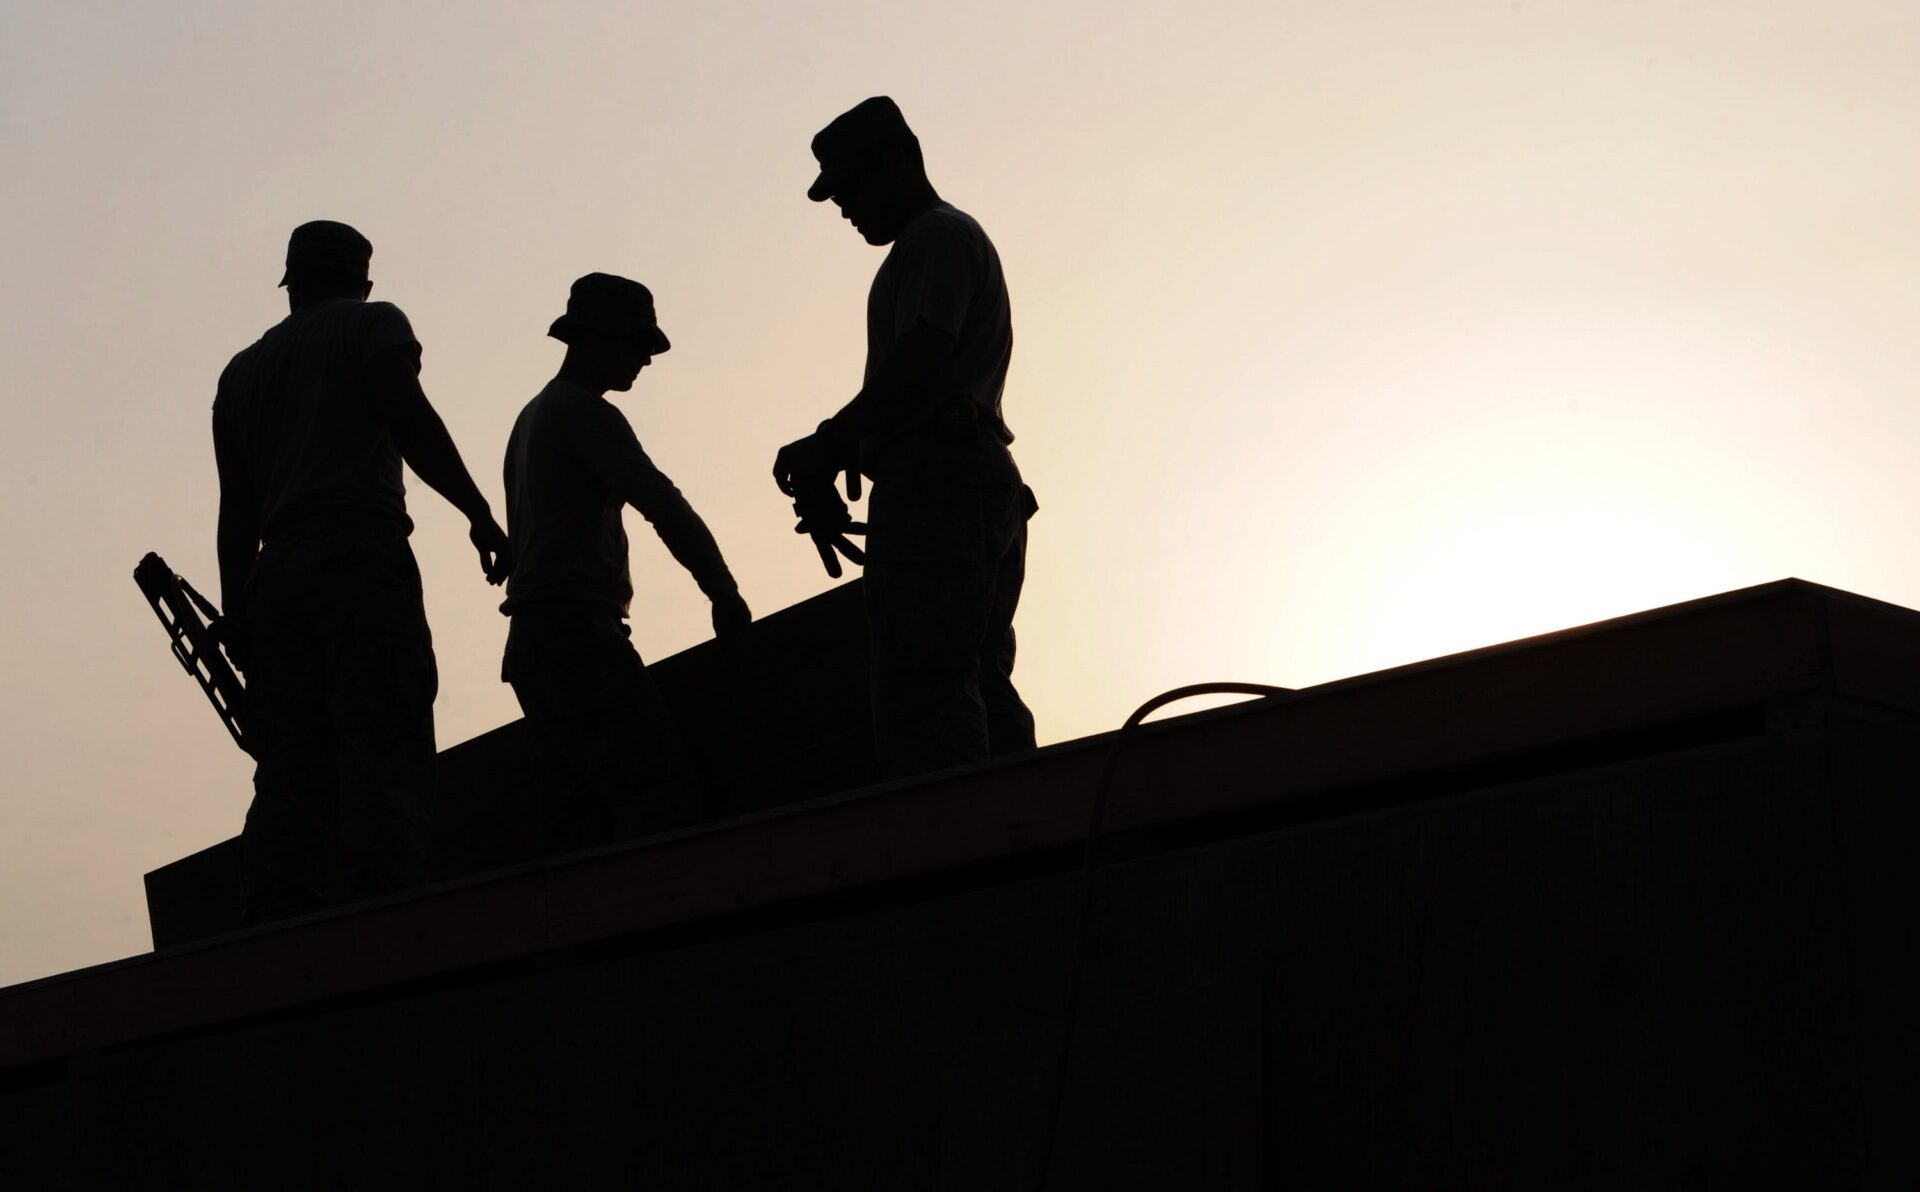 Silhouettes of three men working on top of a roof as the sun sets behind them.